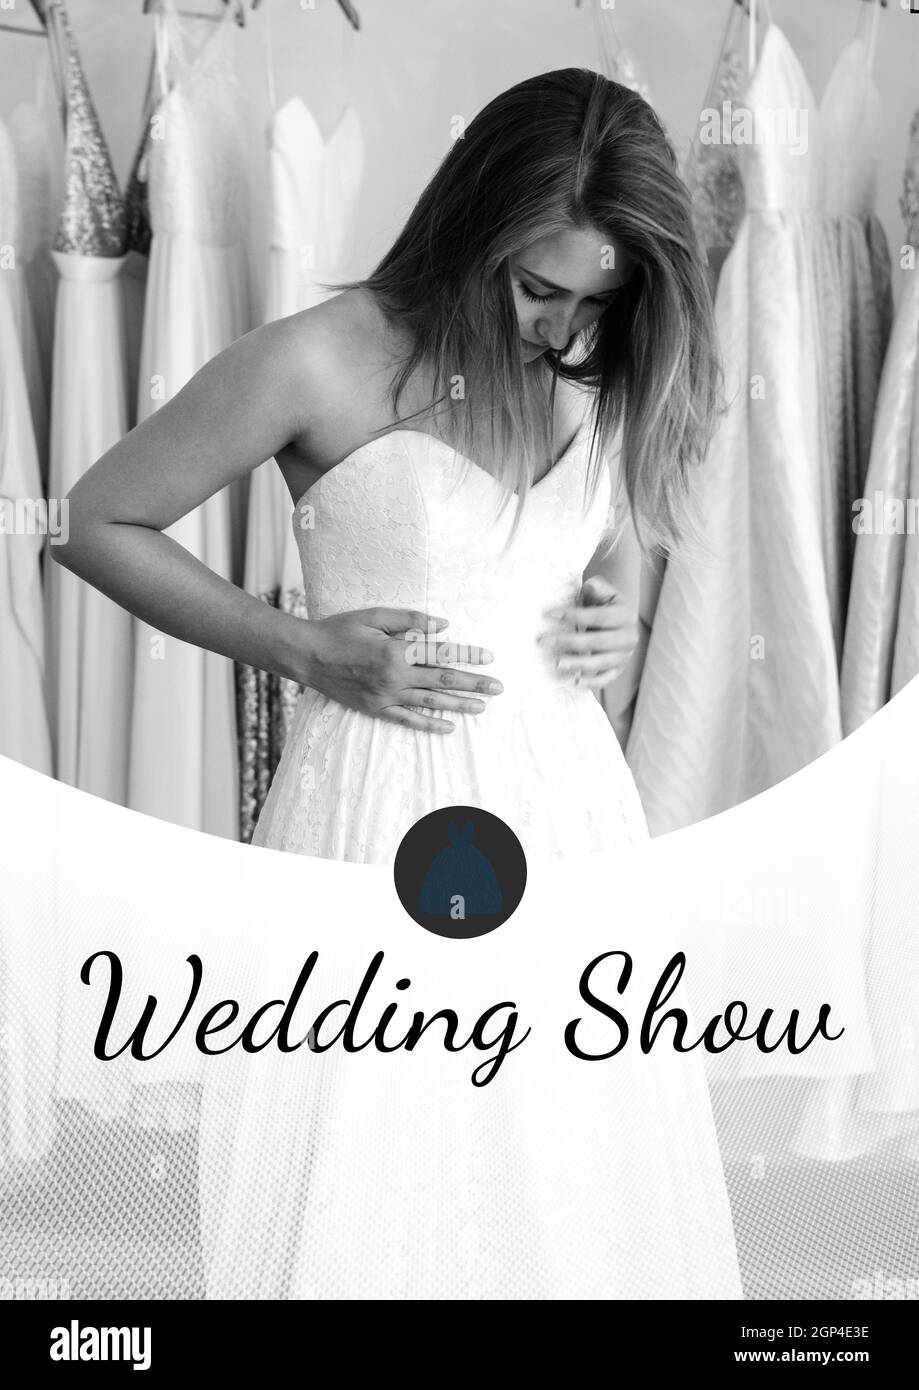 Composition of wedding show text over happy caucasian woman wearing wedding dress Stock Photo